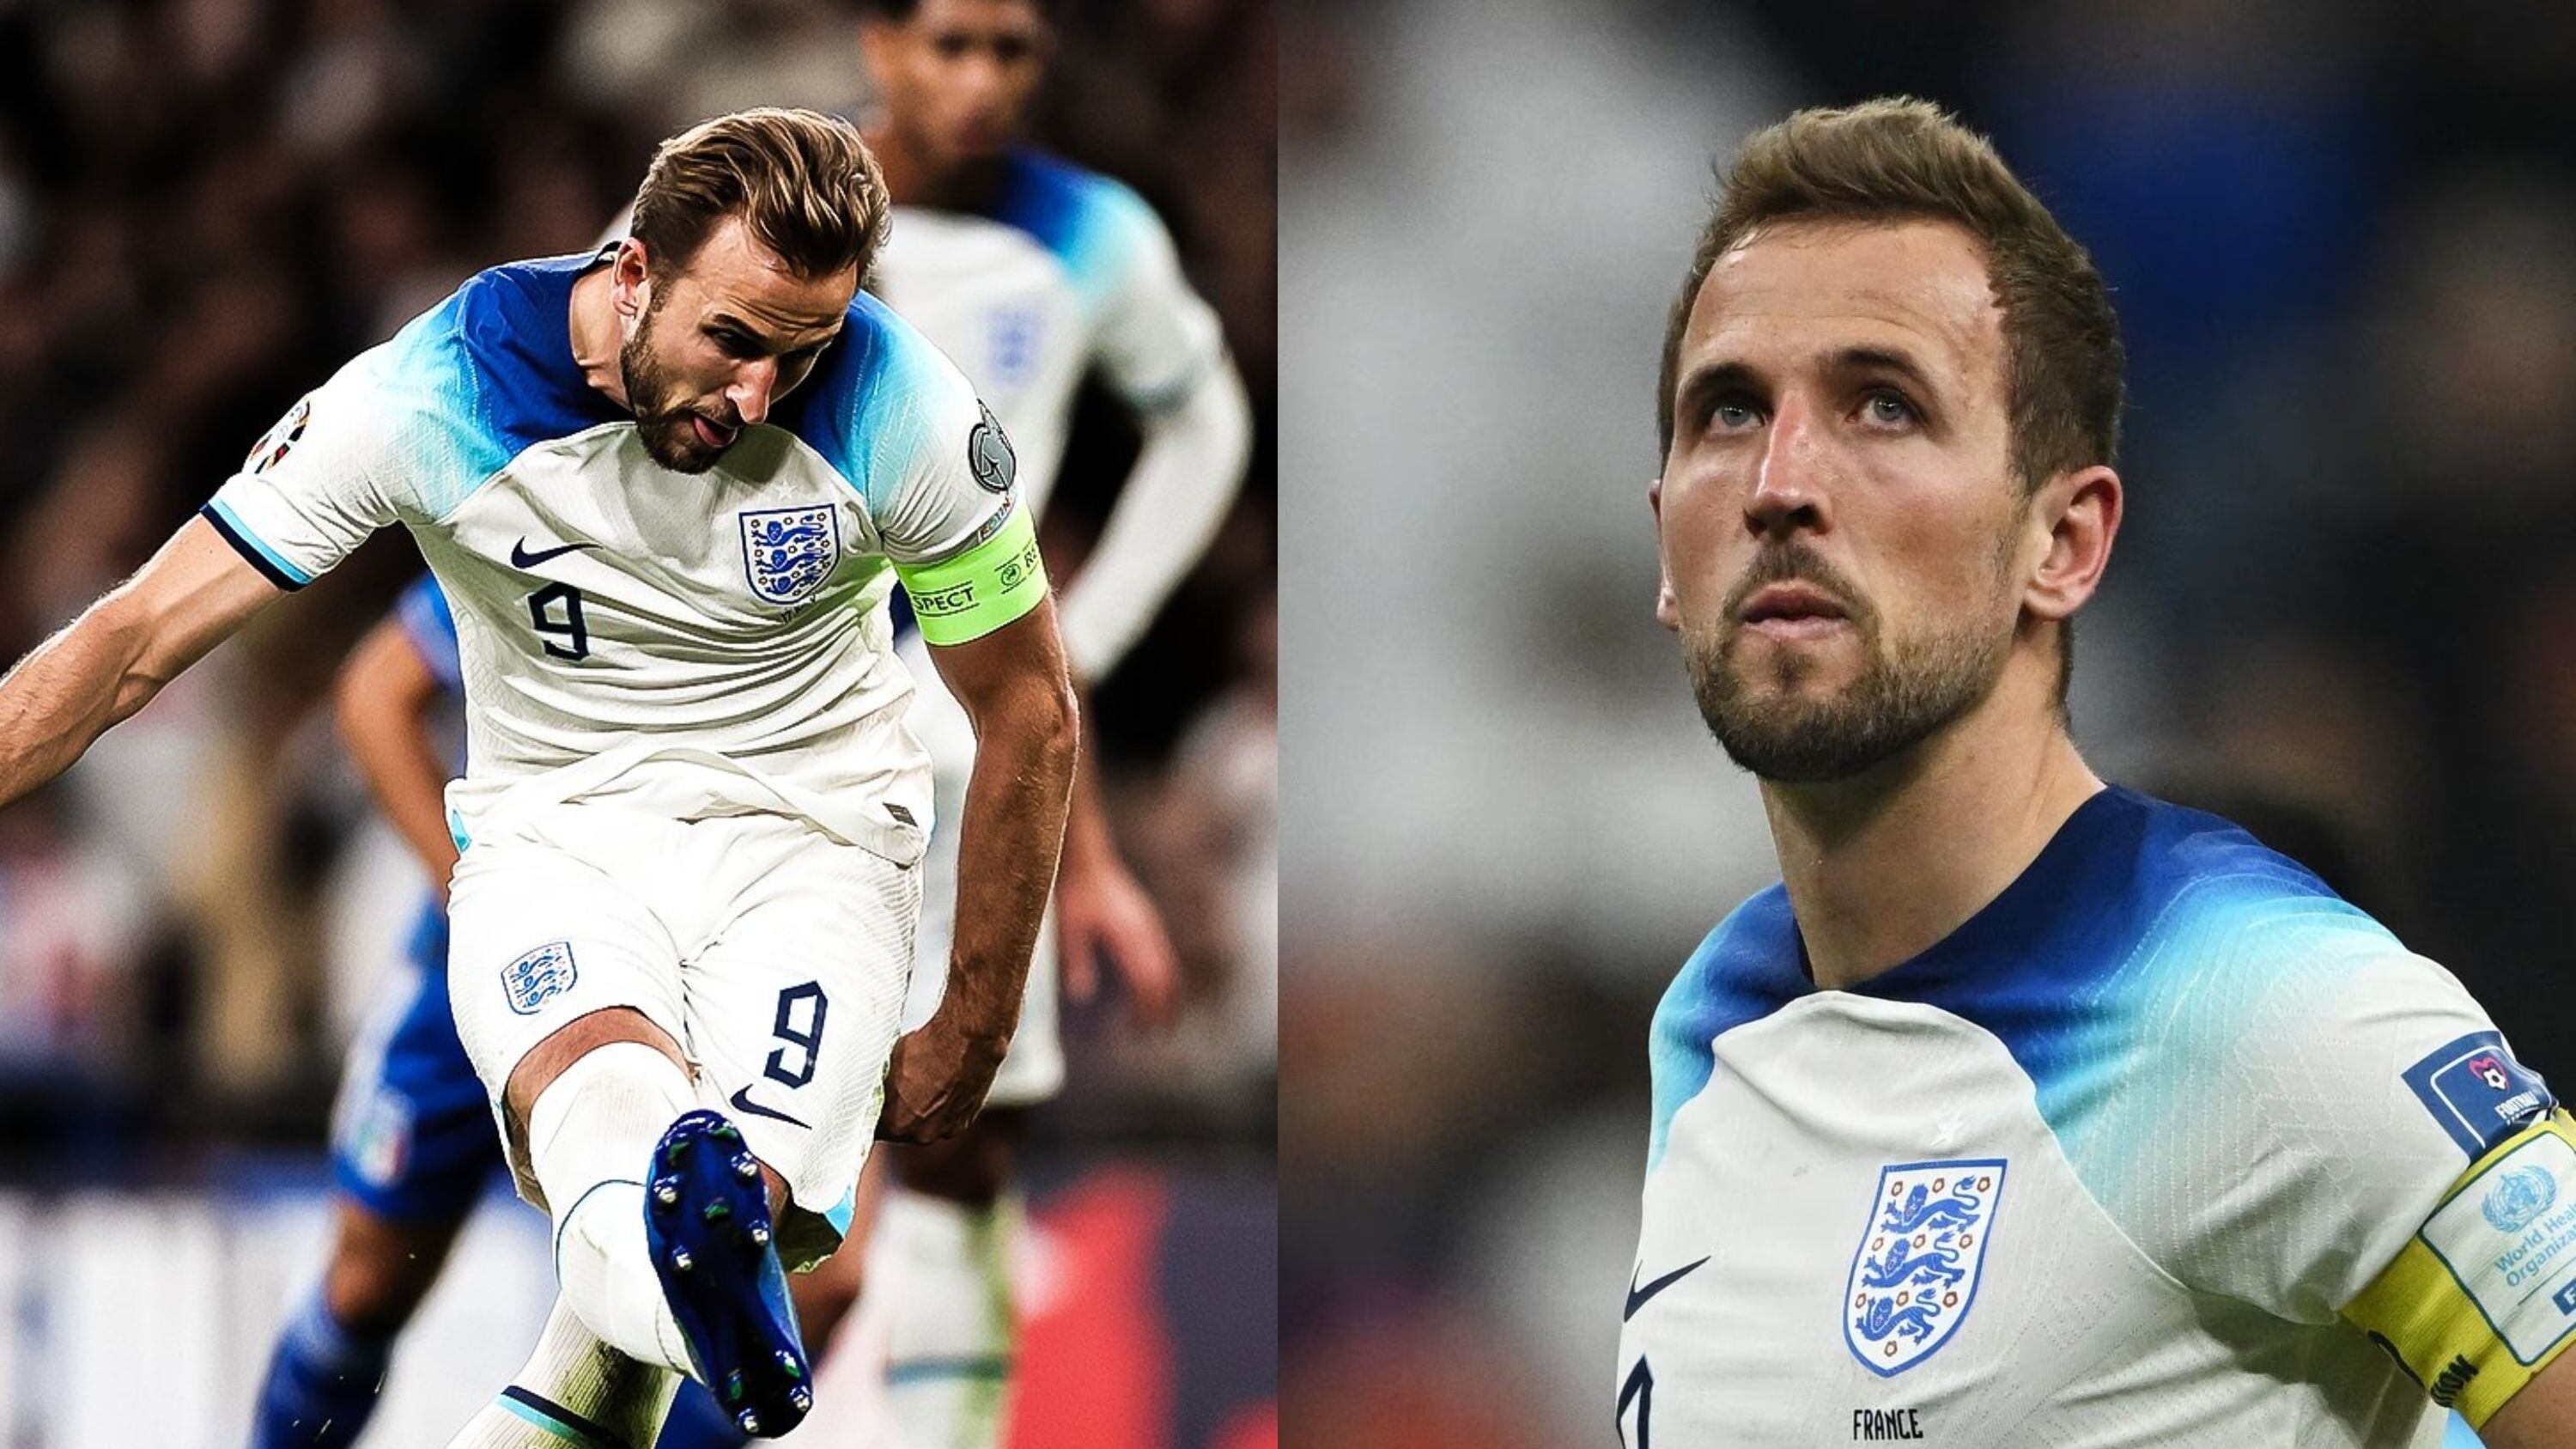 (VIDEO) This was Harry Kane's goal against Italy, his 60th goal with England